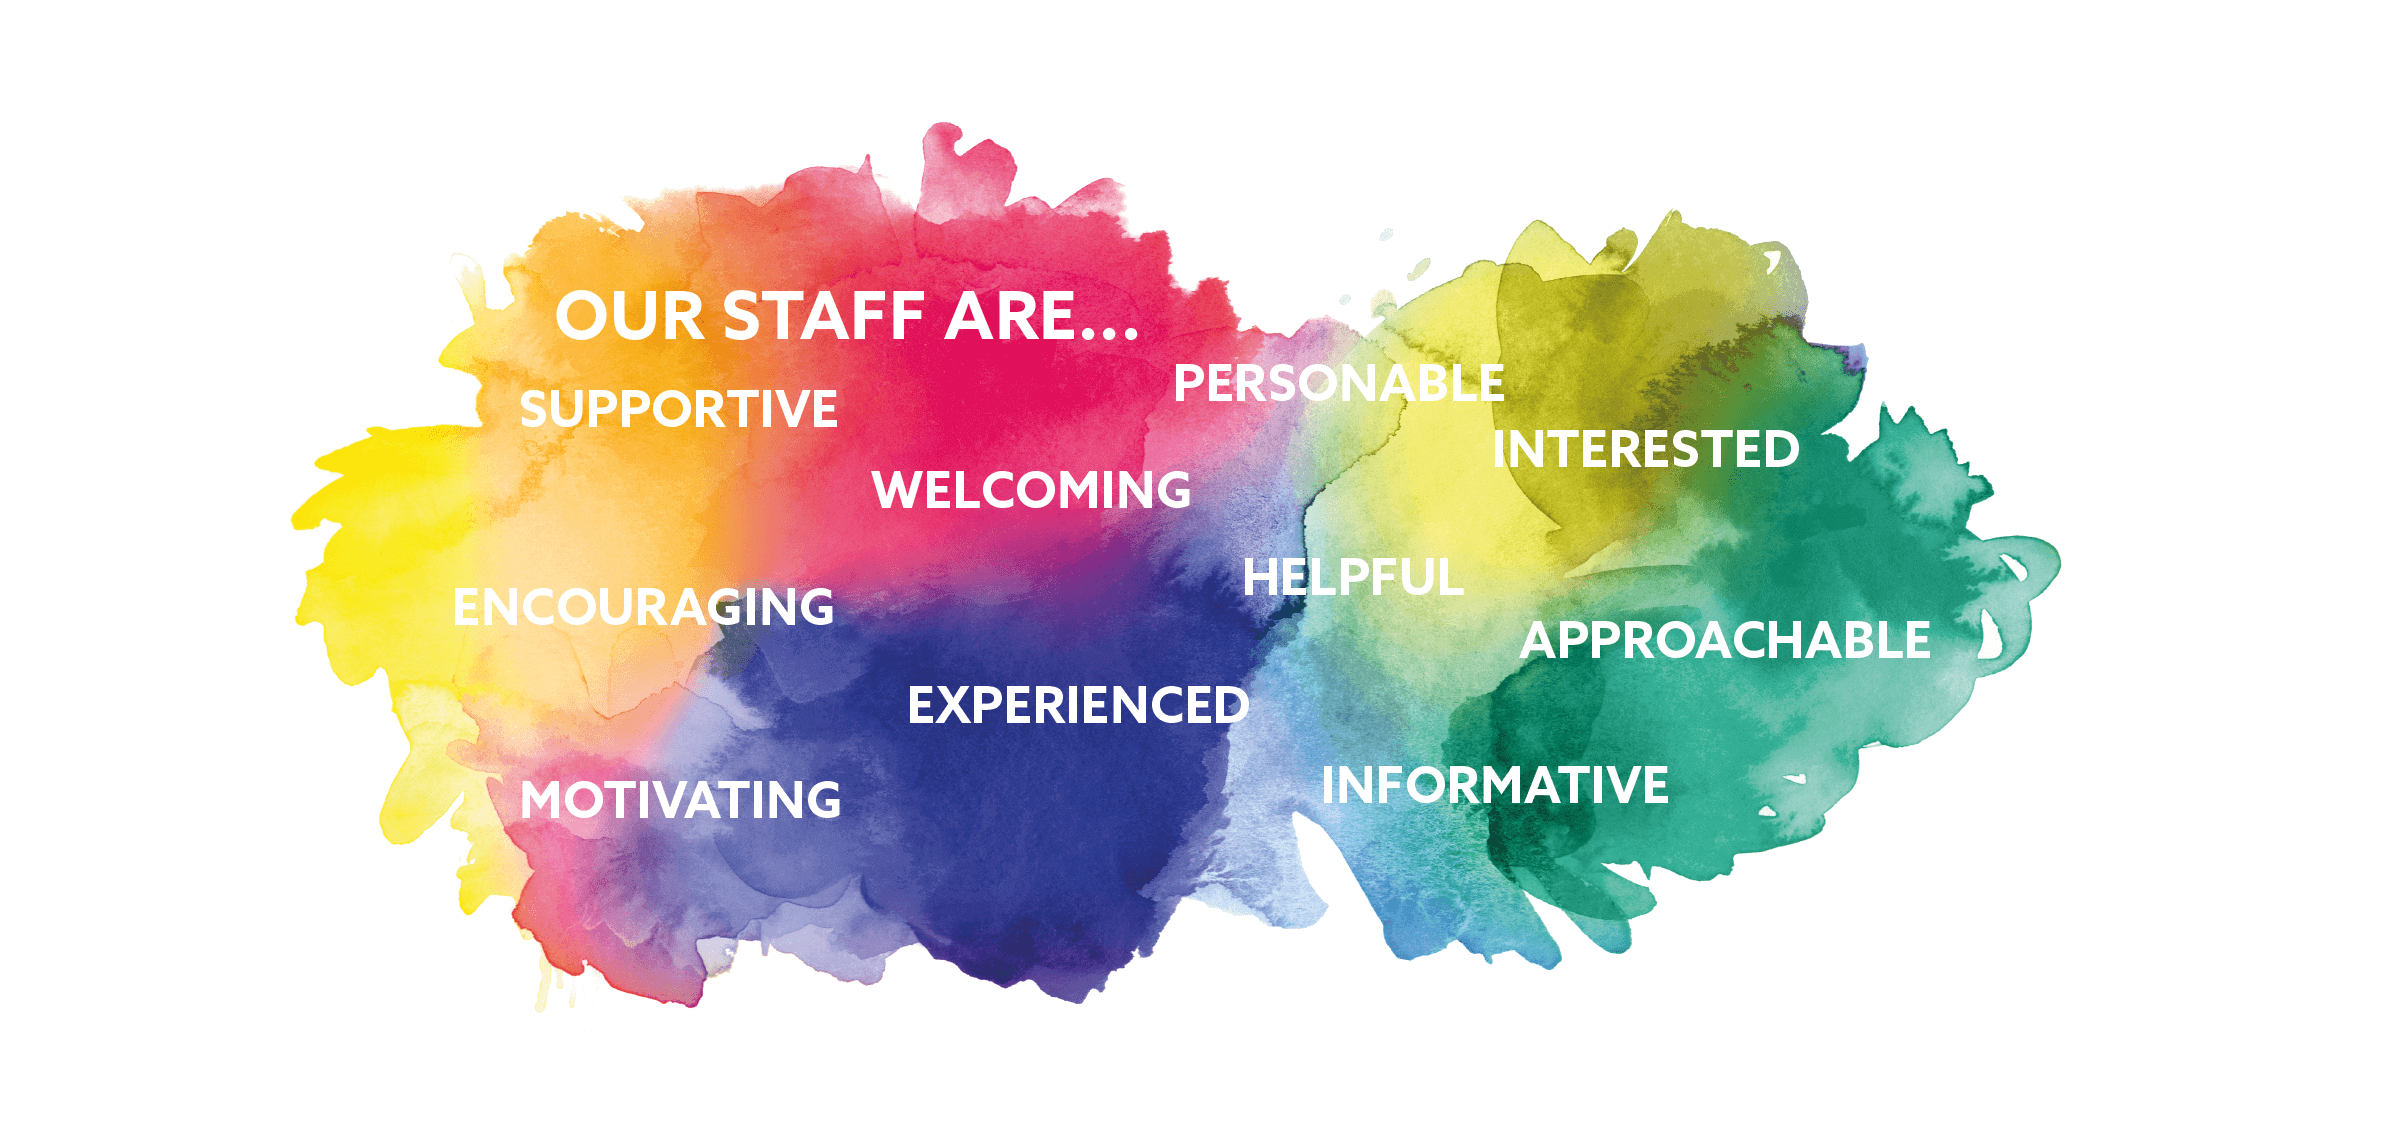 Our Staff Are...